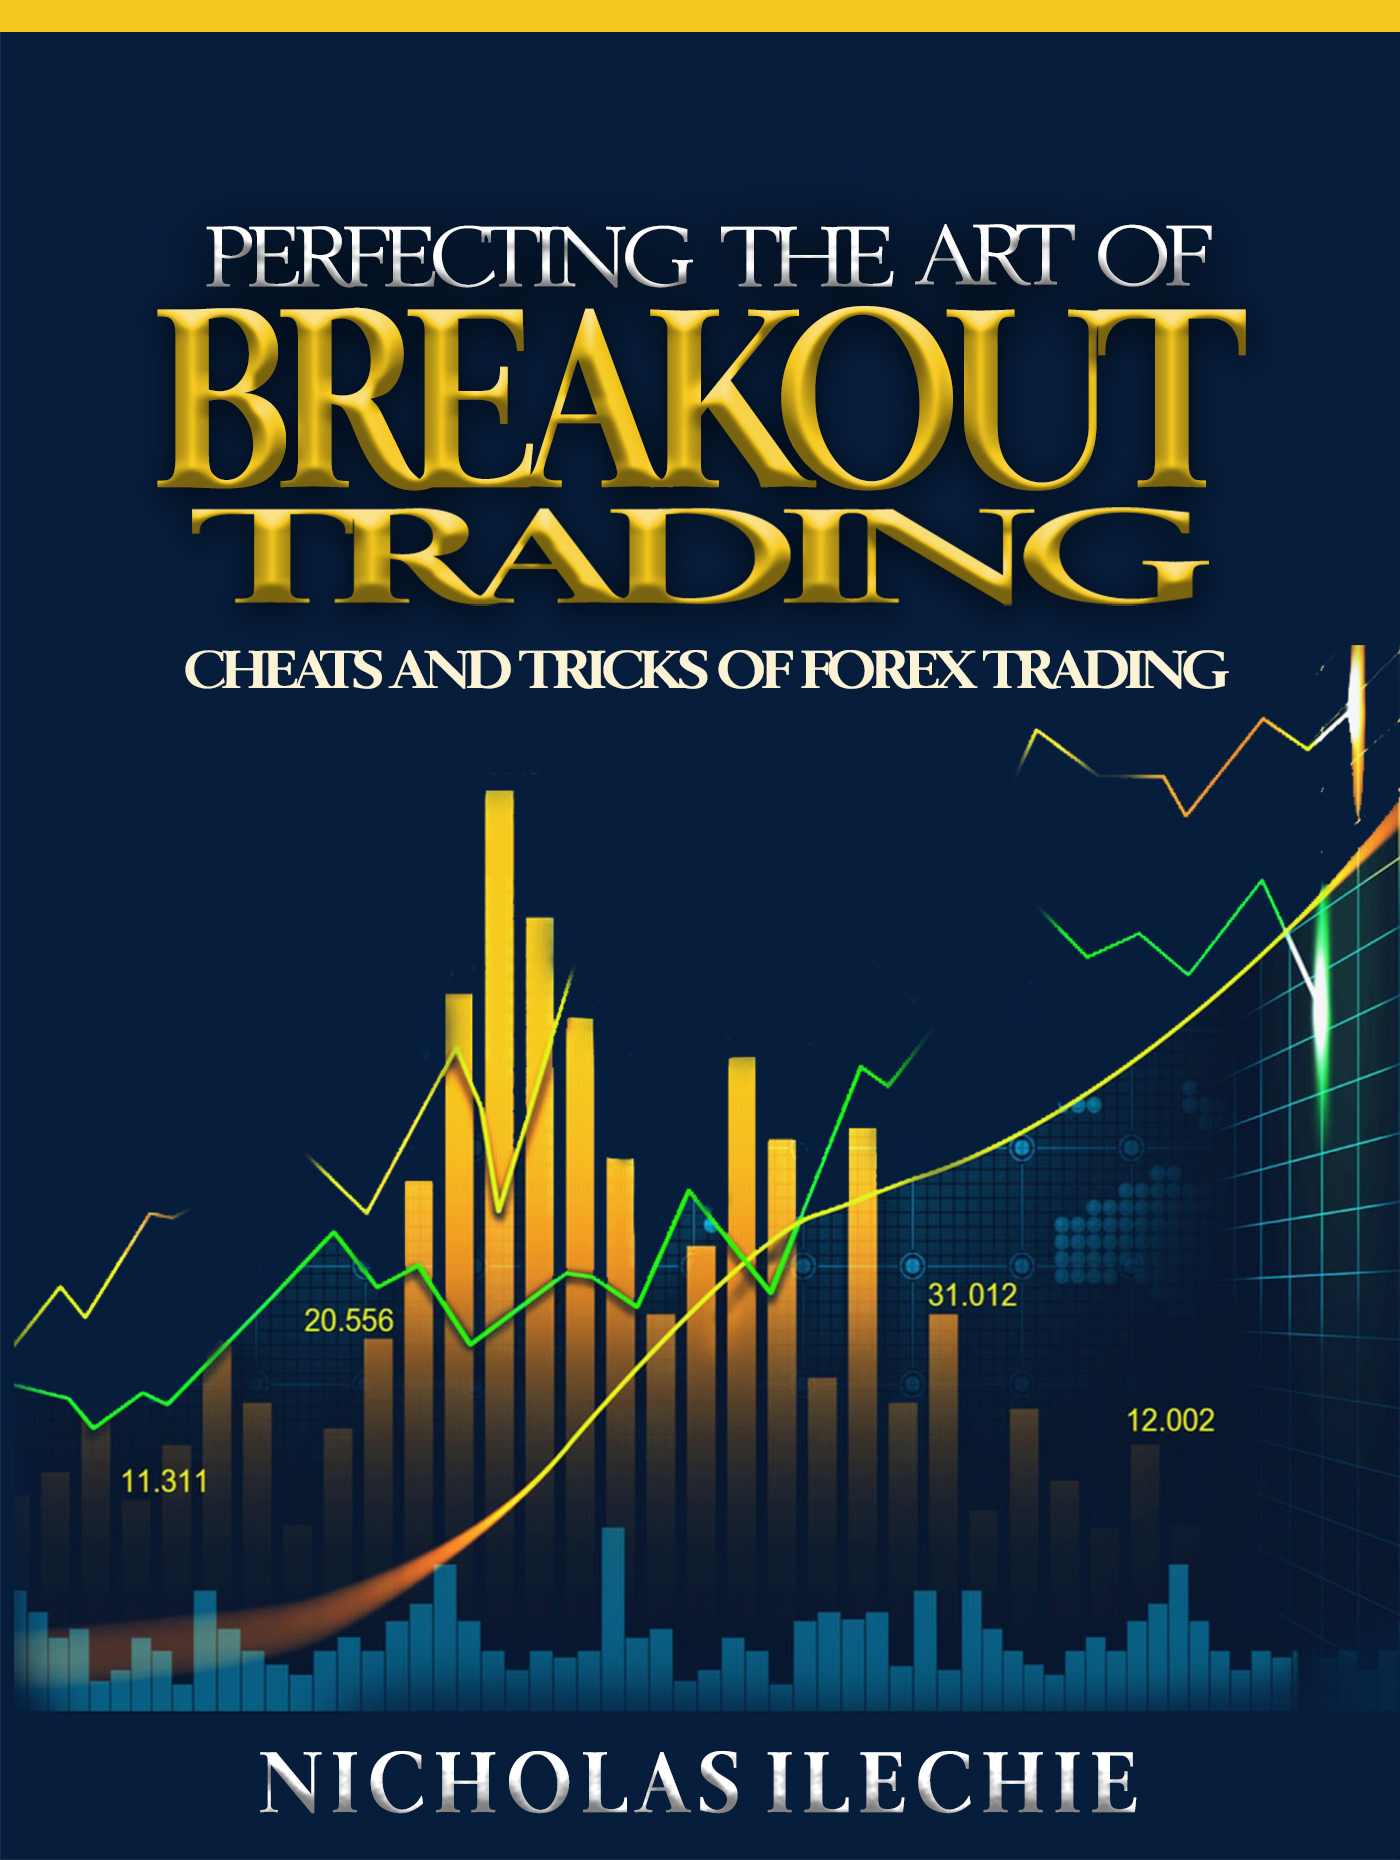 Perfecting The Art Of Breakout Trading Cheats And Tricks Of Forex Trading An Ebook By Nicholas Ilechie - 